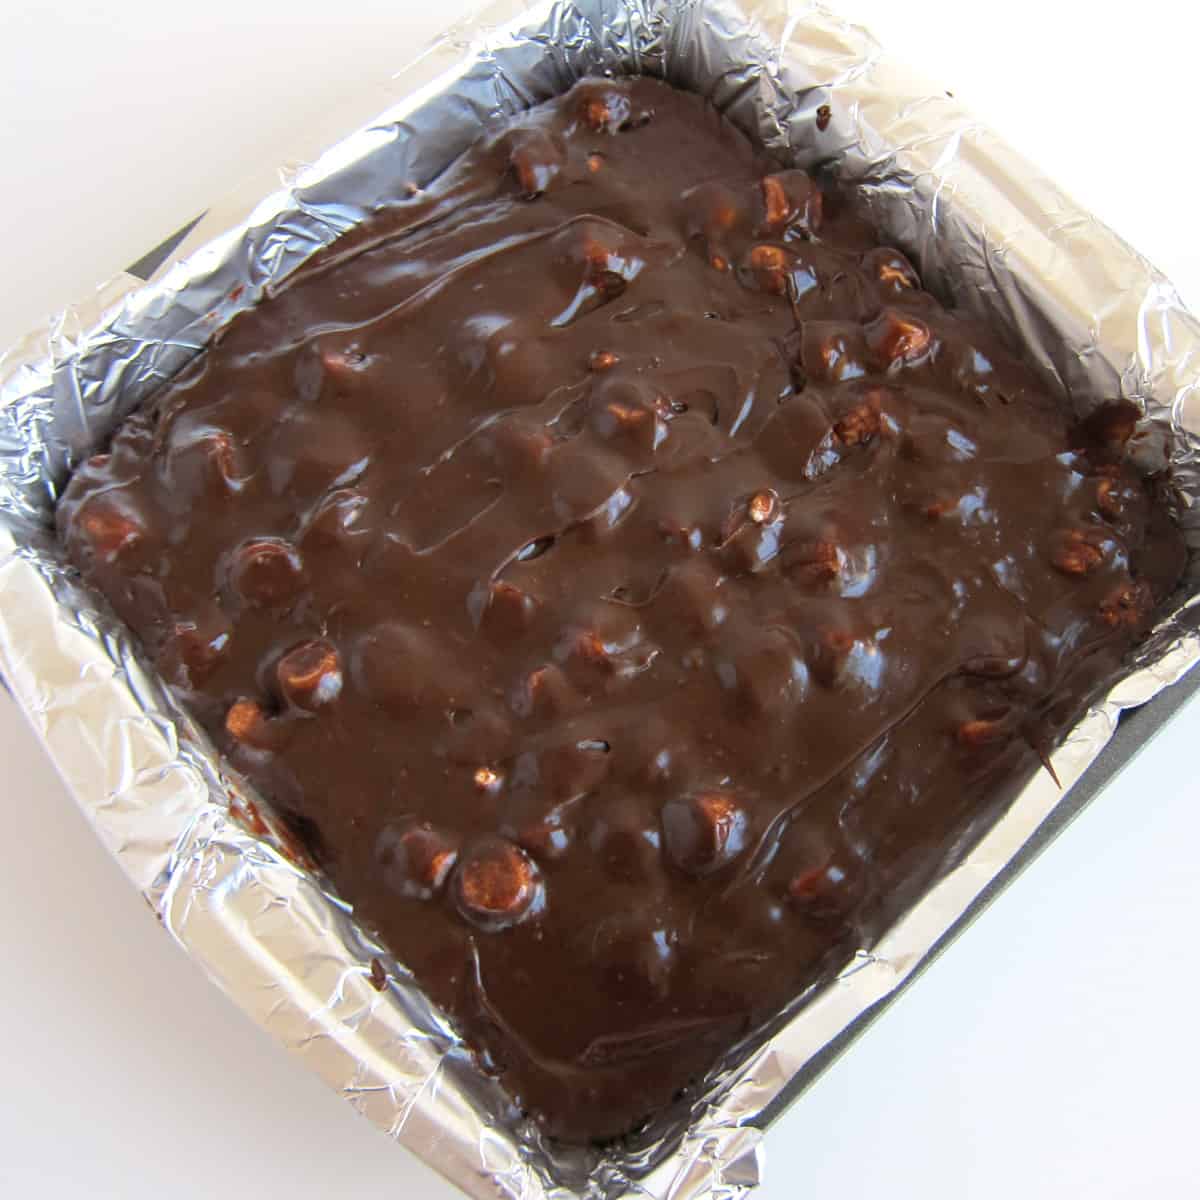 hot chocolate fudge spread into an 8-inch square pan.